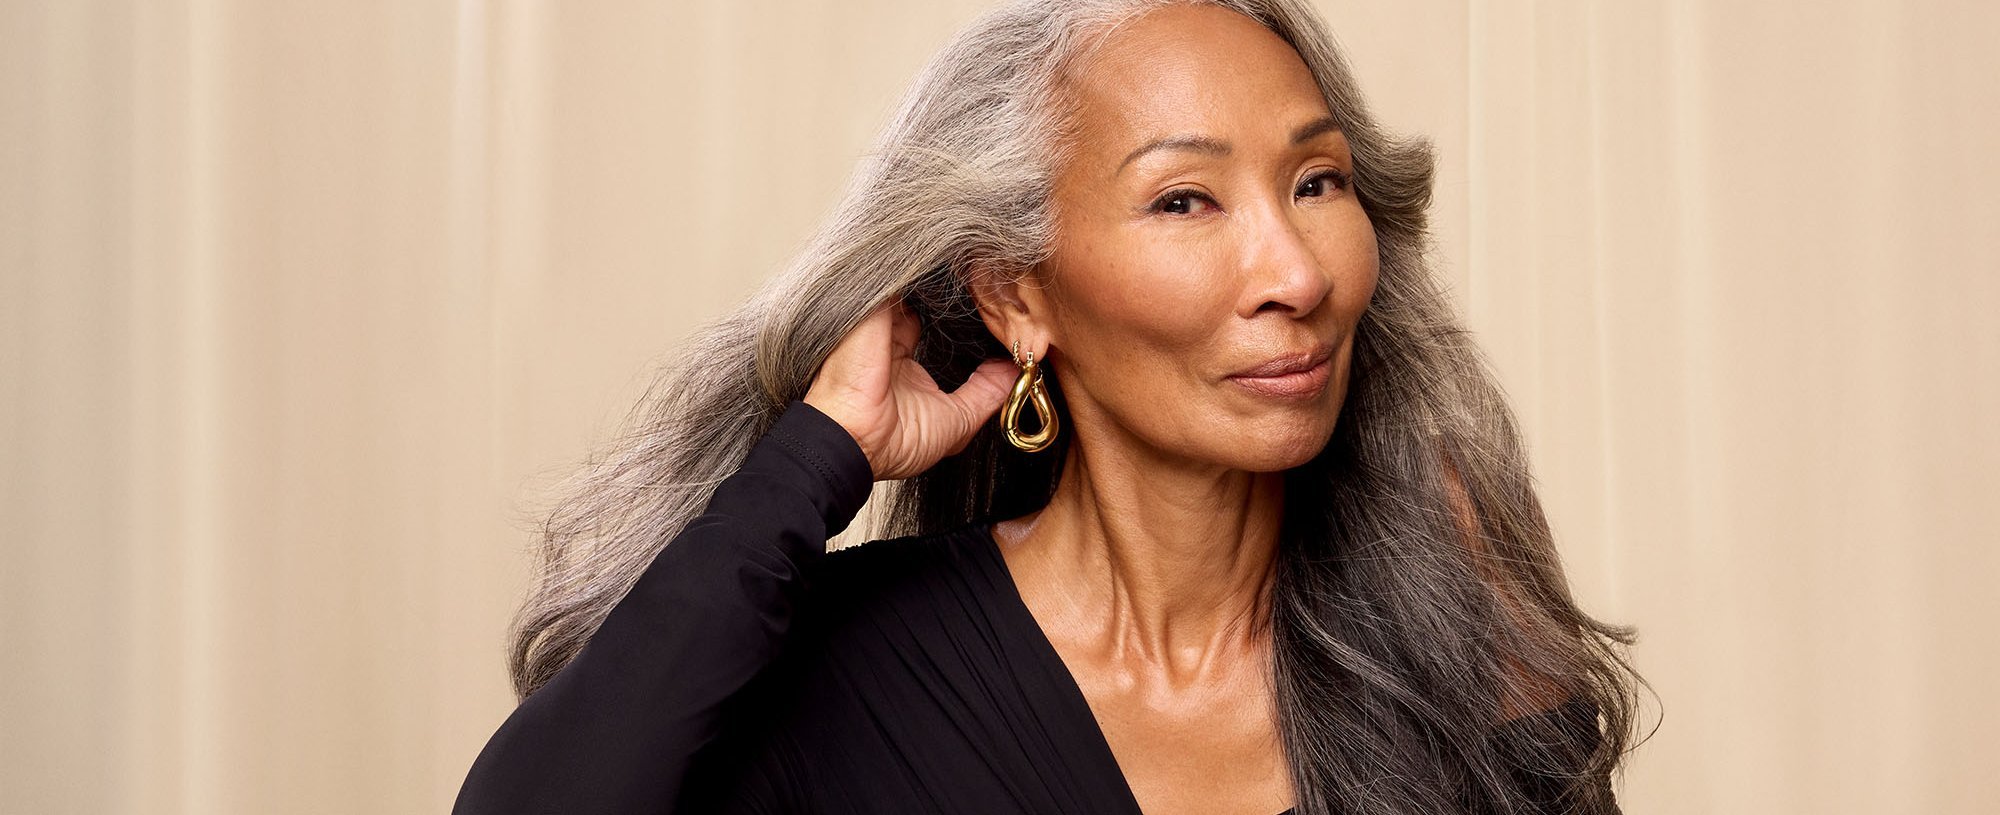 8 Tips for Transitioning to Gray Hair - L'Oréal Paris